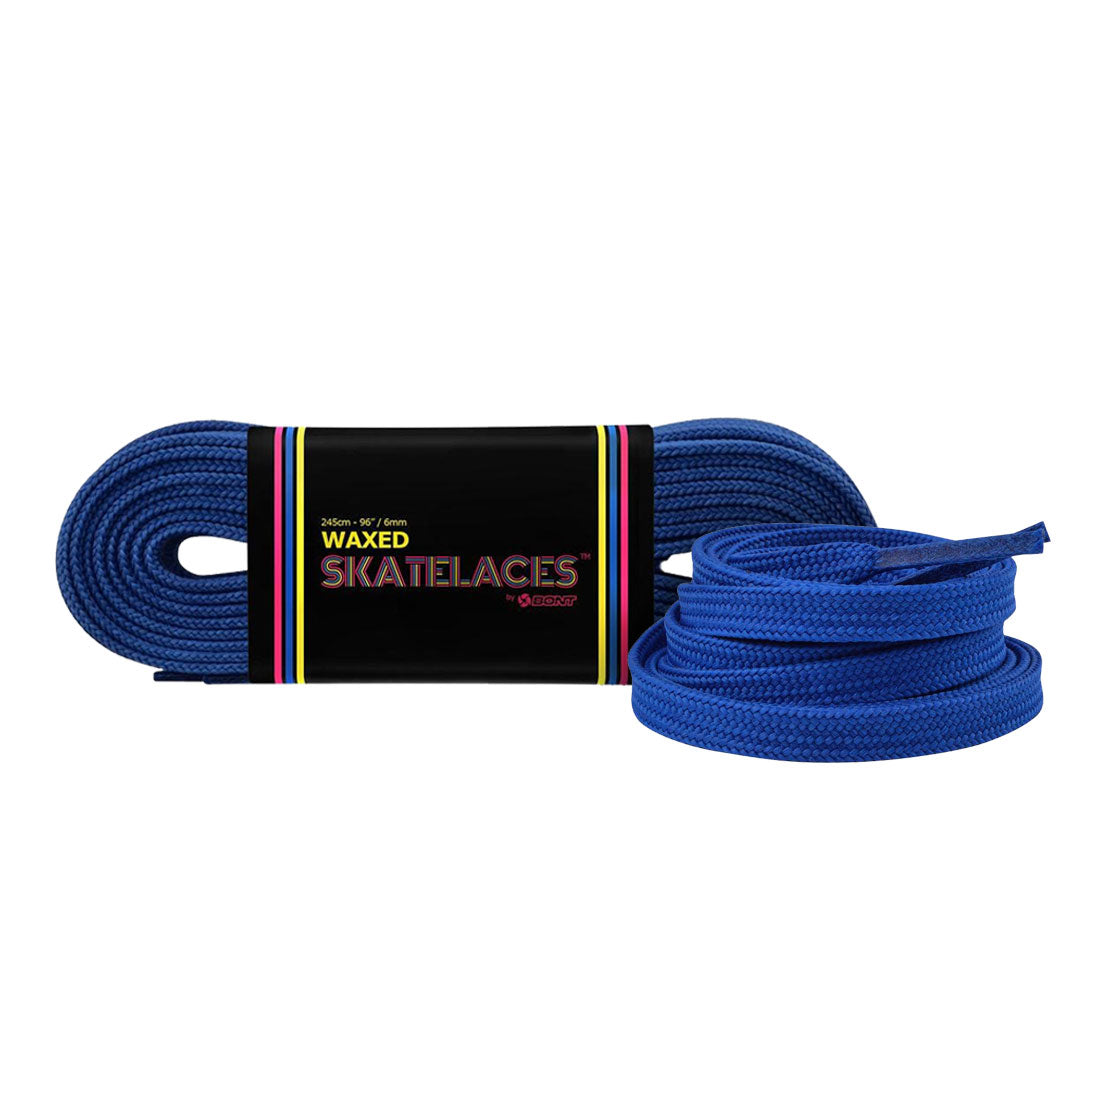 Bont Waxed 6mm Laces - 245cm/96in Mad About You Blue Laces